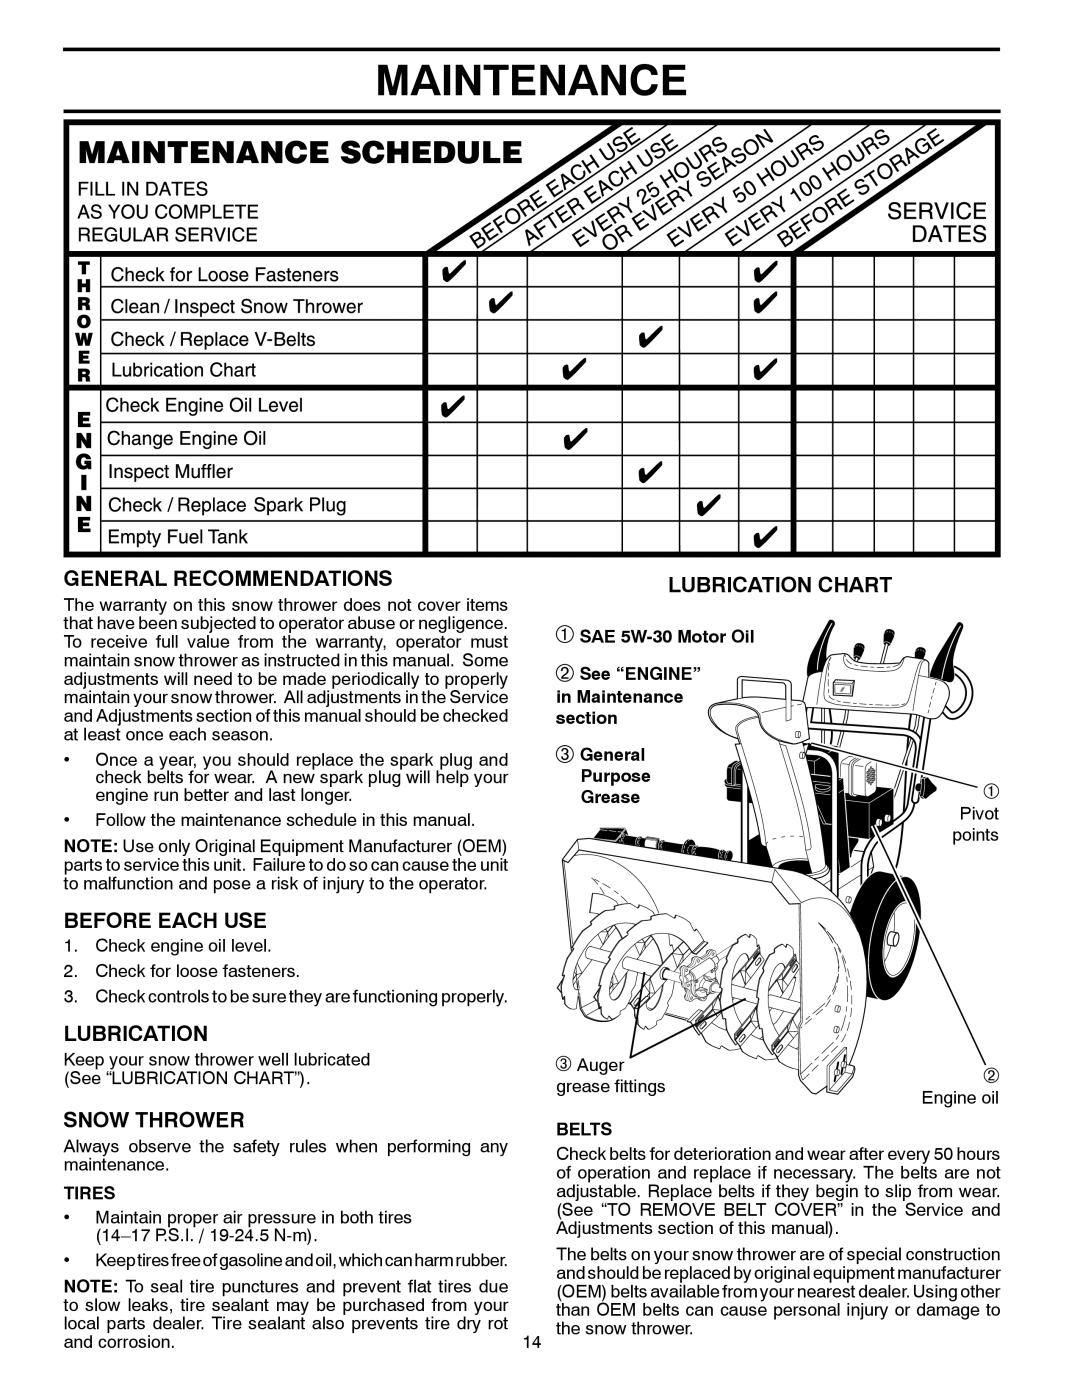 Poulan PR827ES Maintenance, General Recommendations, Lubrication Chart, Before Each Use, Snow Thrower, Purpose Grease 